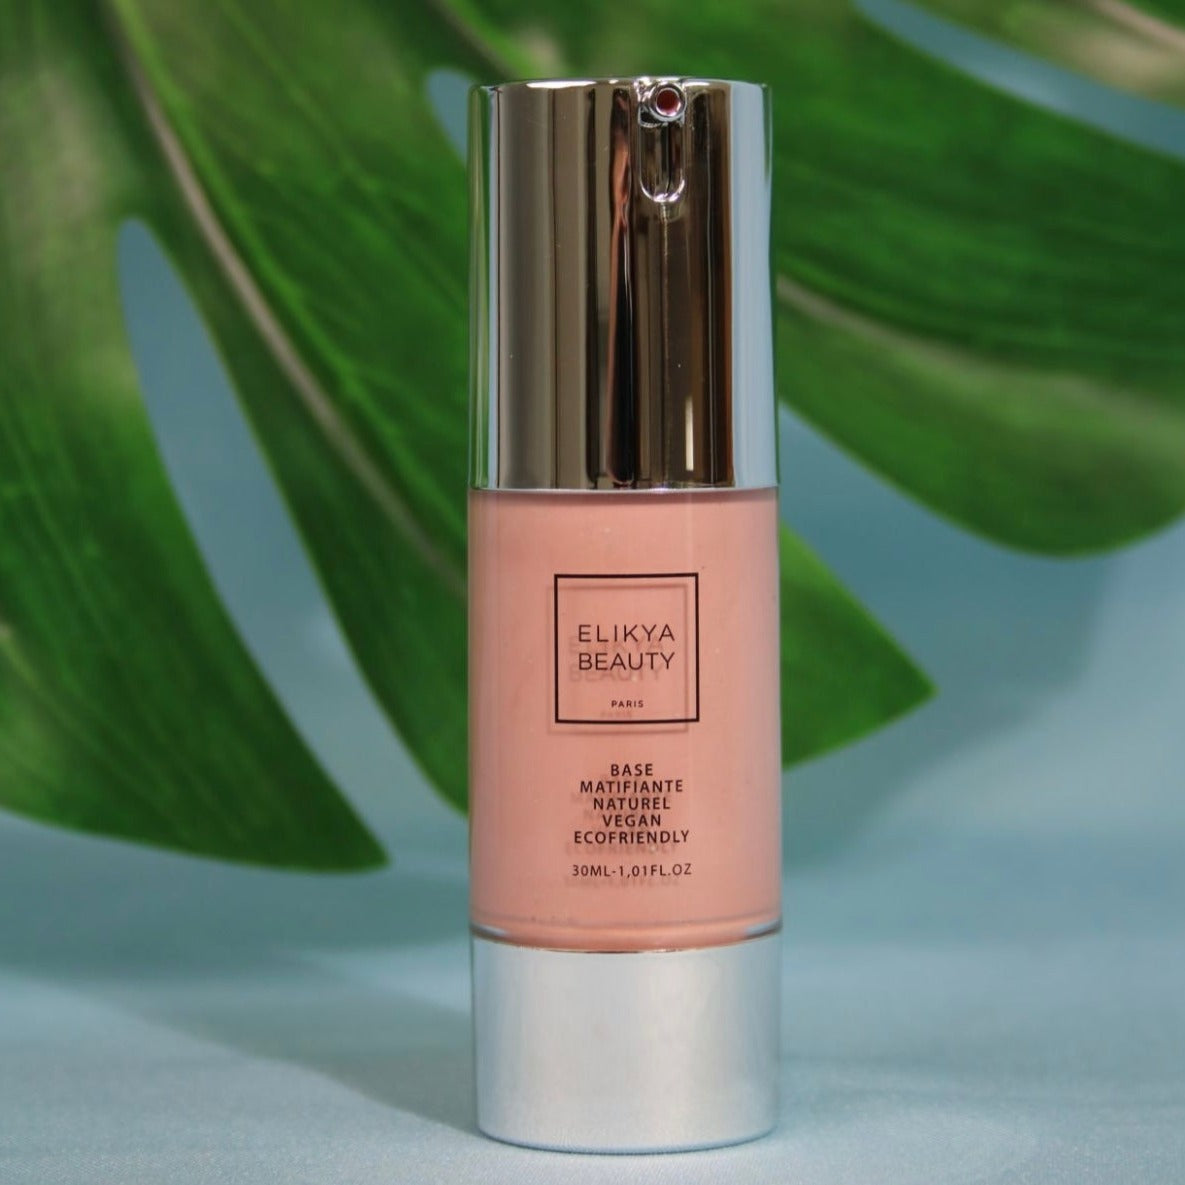 Mattifying base, healthy glow with CARROTS &amp; PINK CLAY extracts